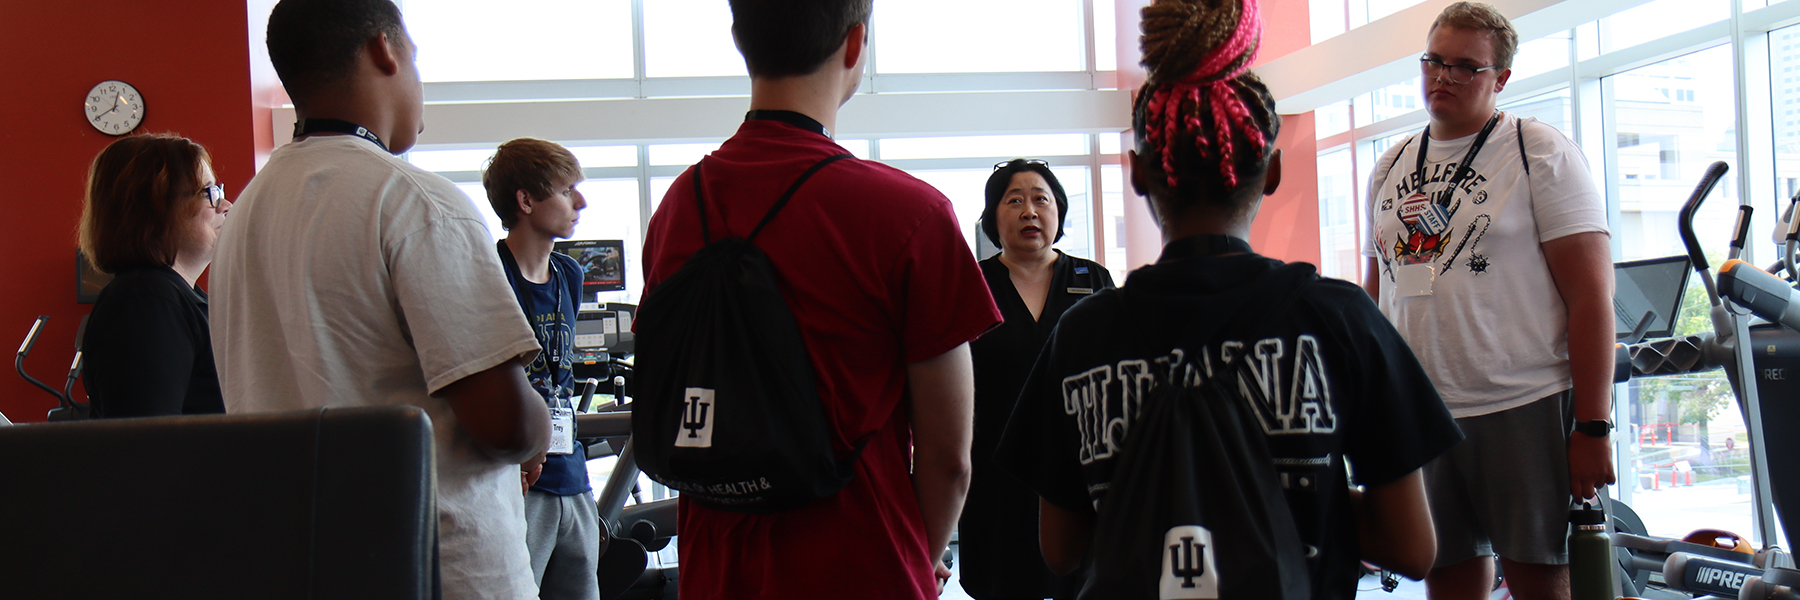 A group of students stand in a semi-circle around a woman speaking to them in a gym space of cardio machines.